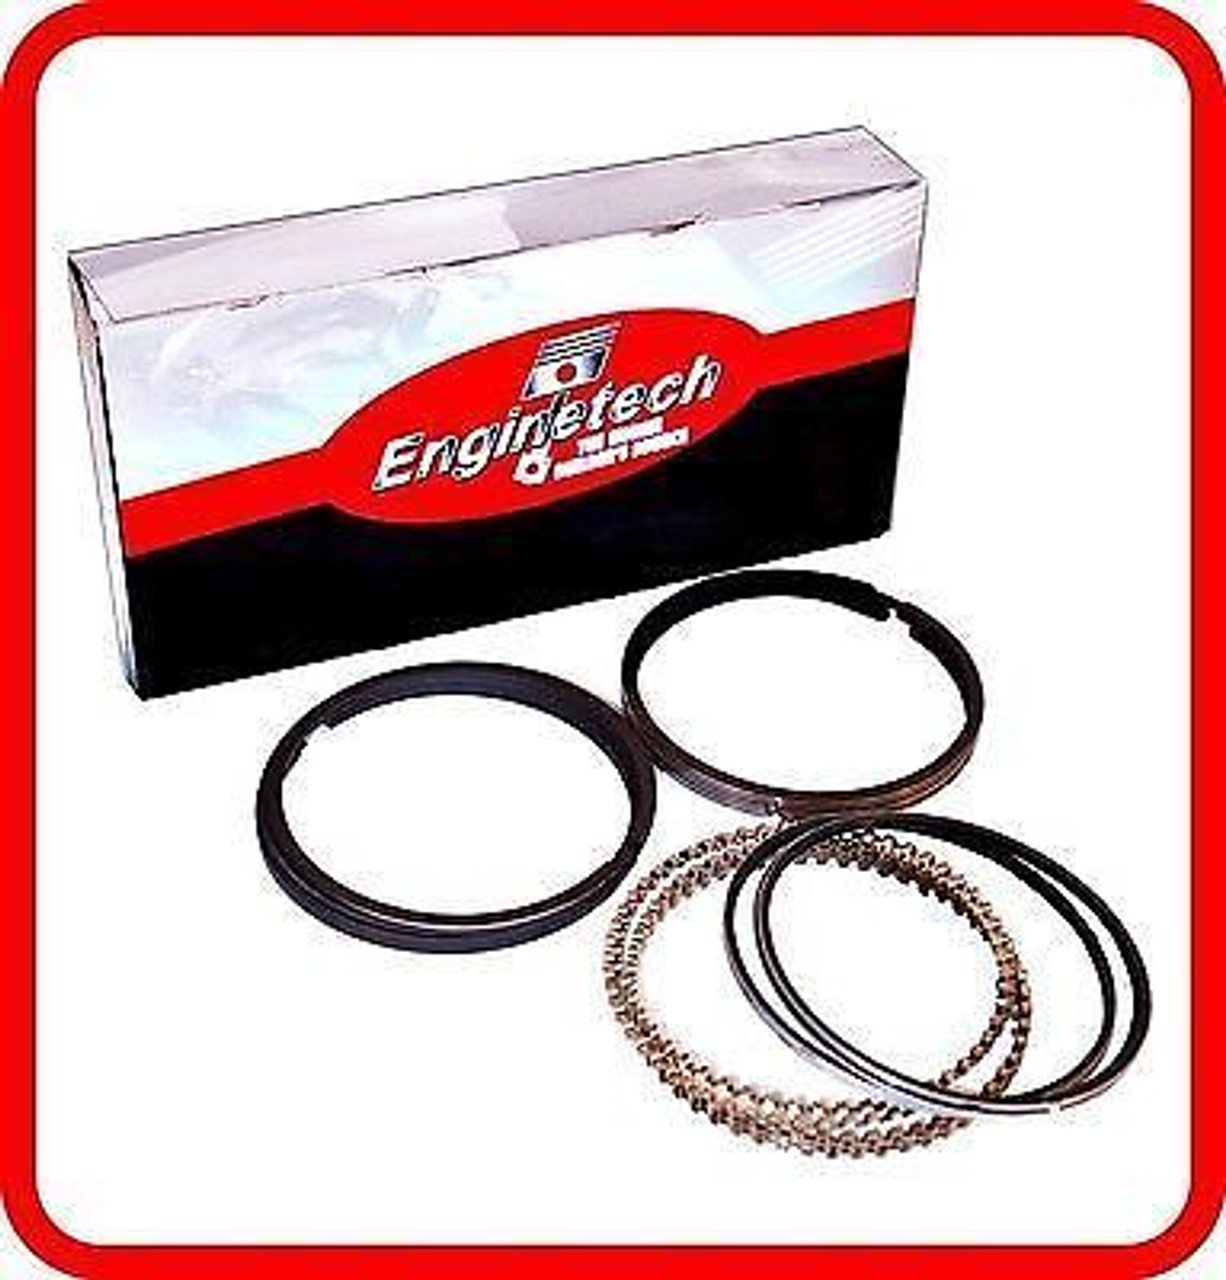 2010 Ford Expedition 5.4L Engine Piston Ring Set S90228 -1312